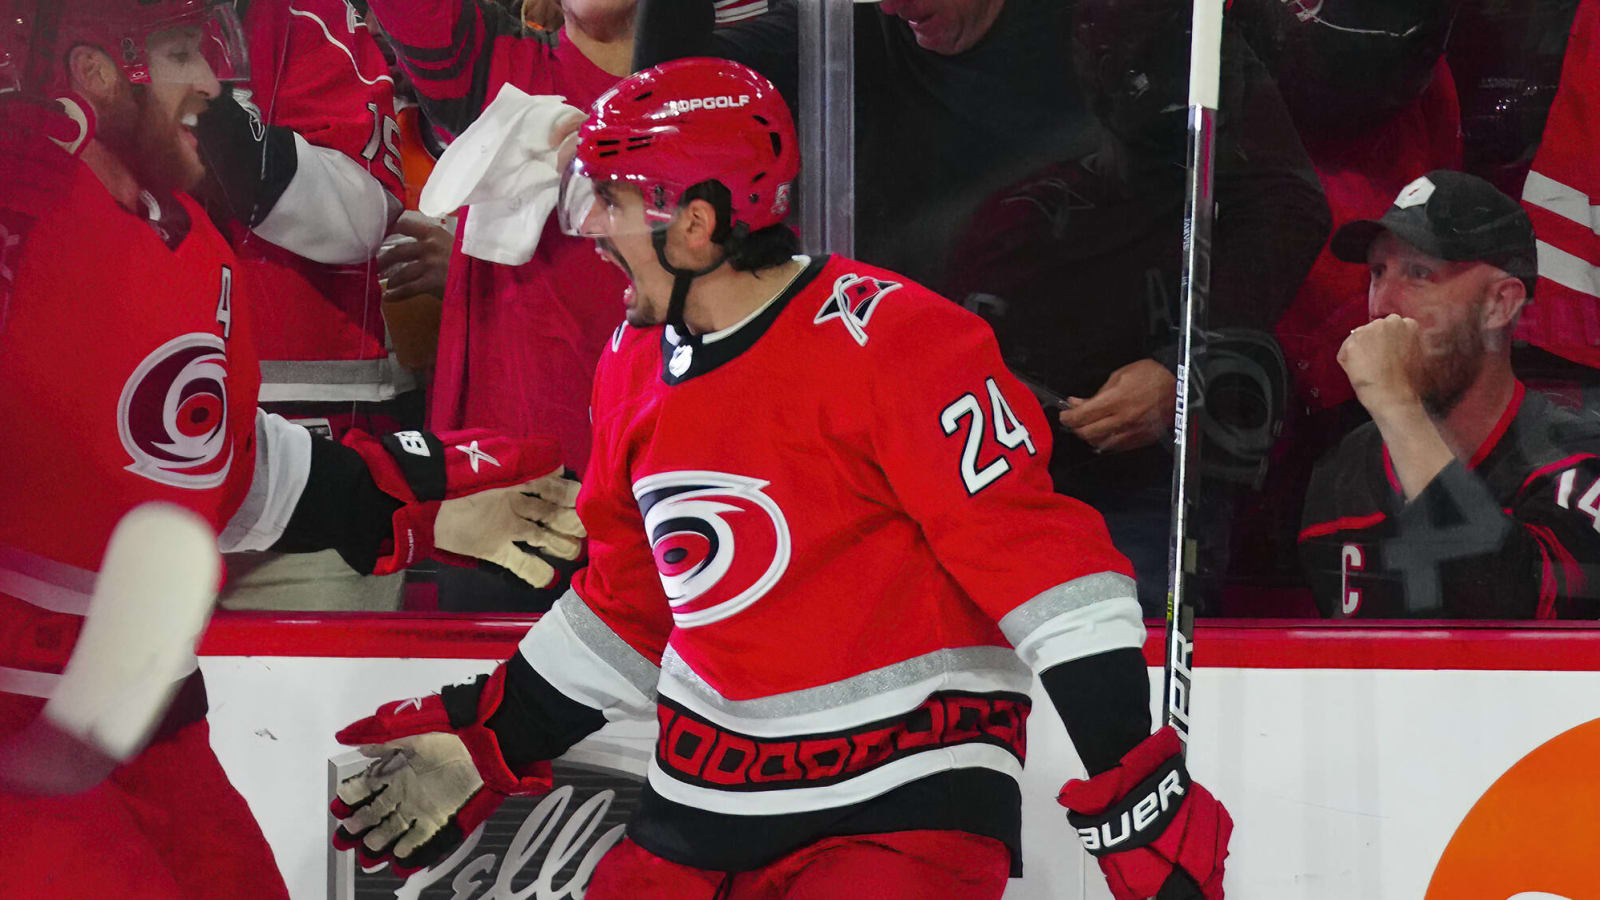 Hurricanes expect better from Devils after Game 1